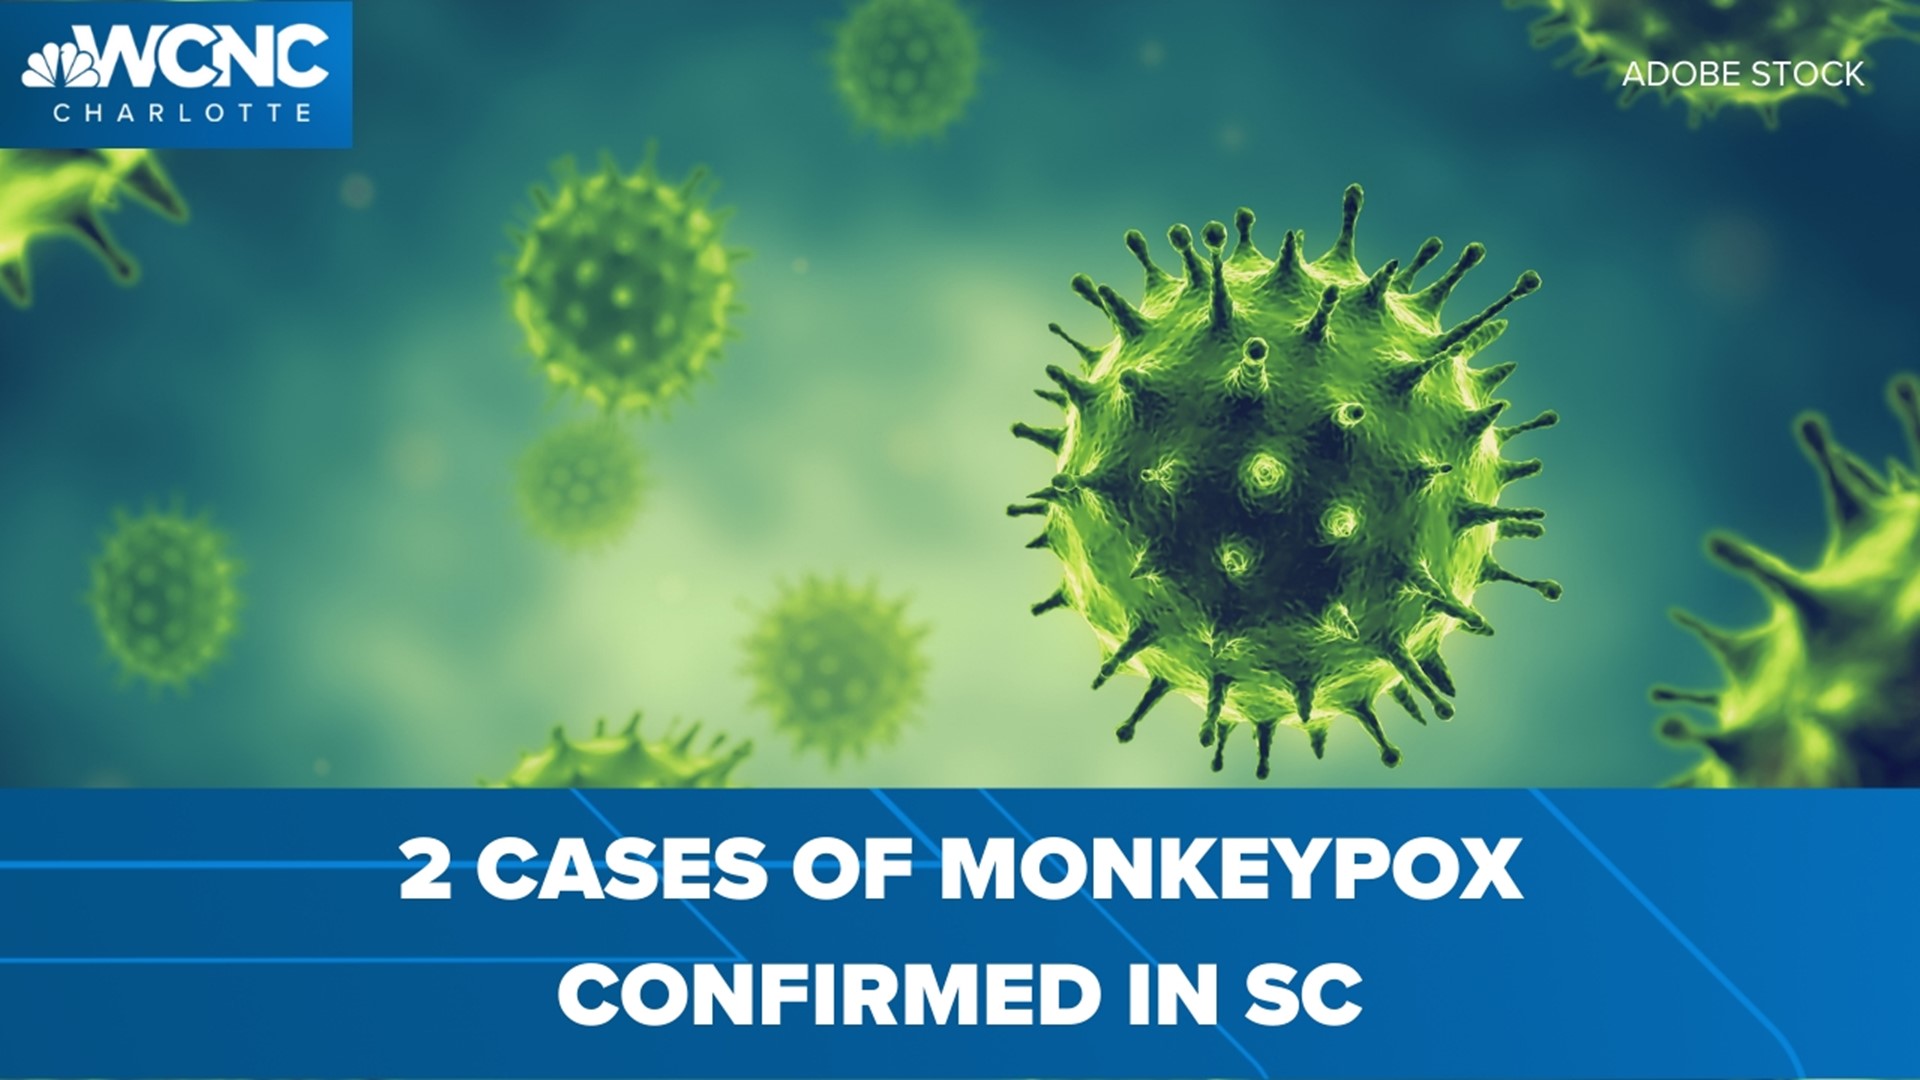 The CDC still ranks monkeypox as "low" risk to the general U.S. population, since the virus does not spread easily without close contact.